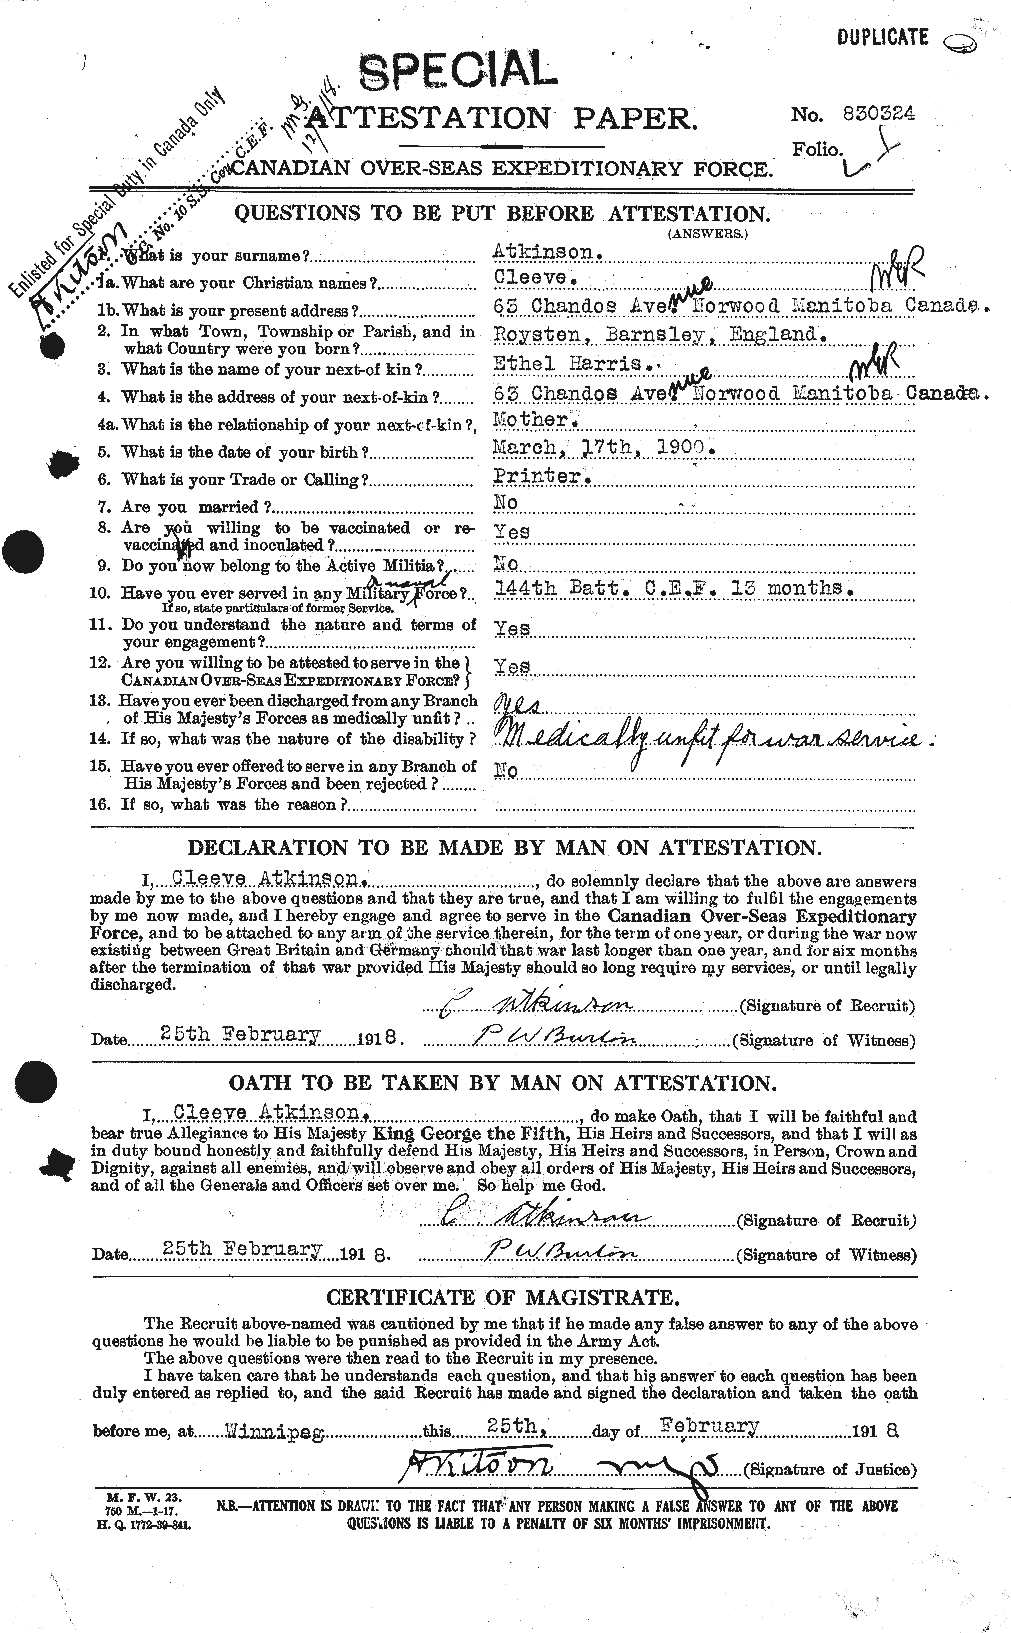 Personnel Records of the First World War - CEF 217514a